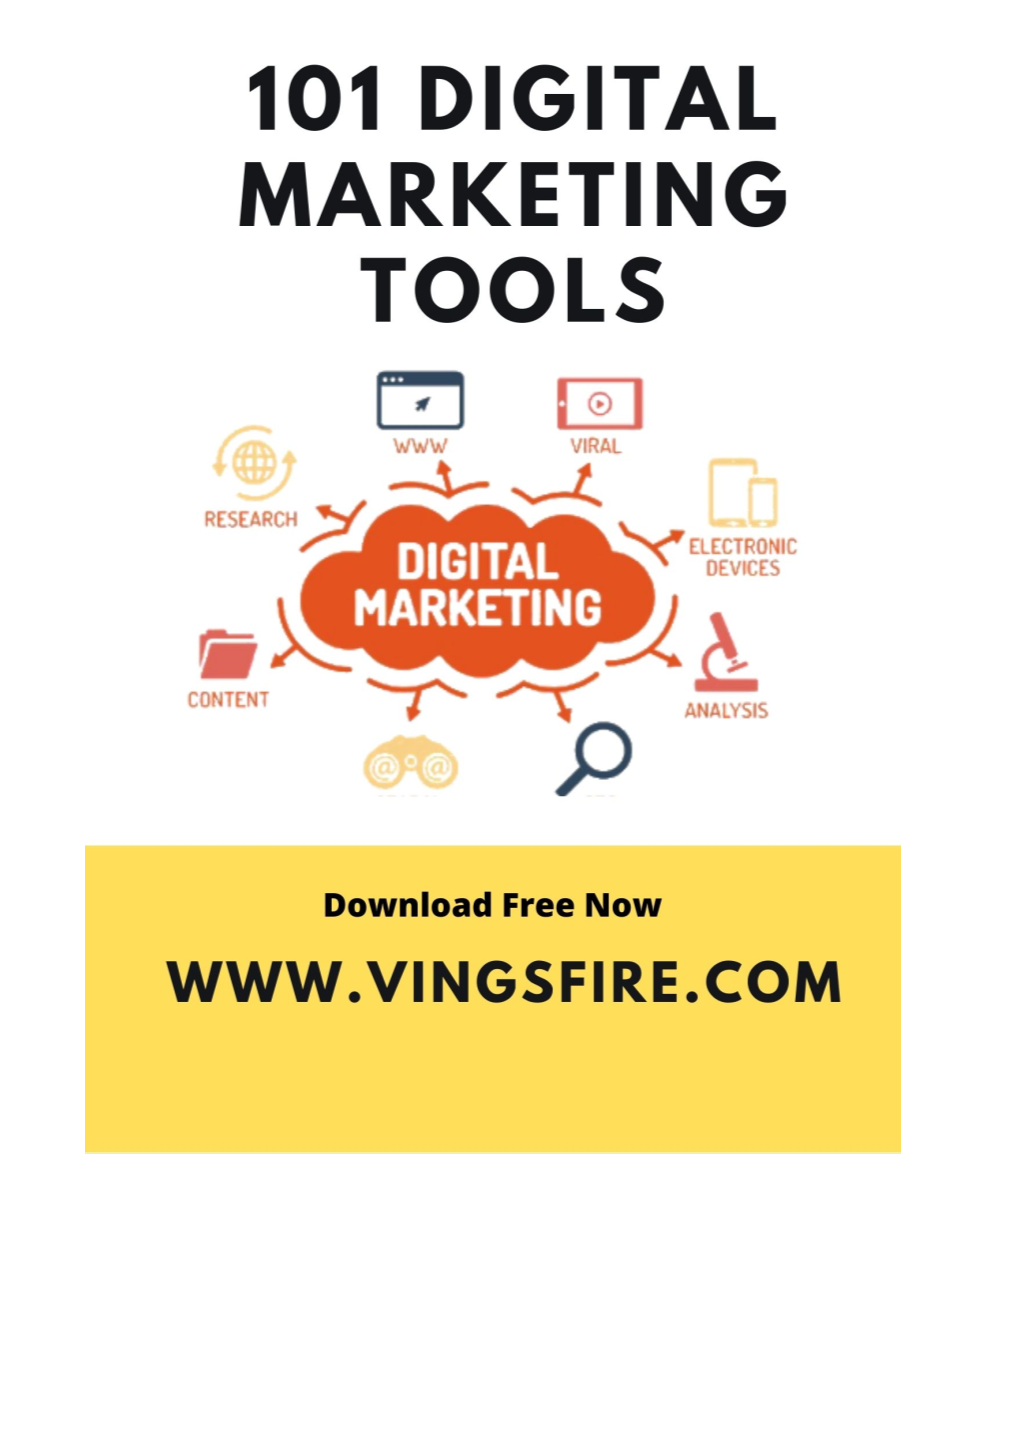 How 101 Digital Marketing Tools Make Your Business Successful